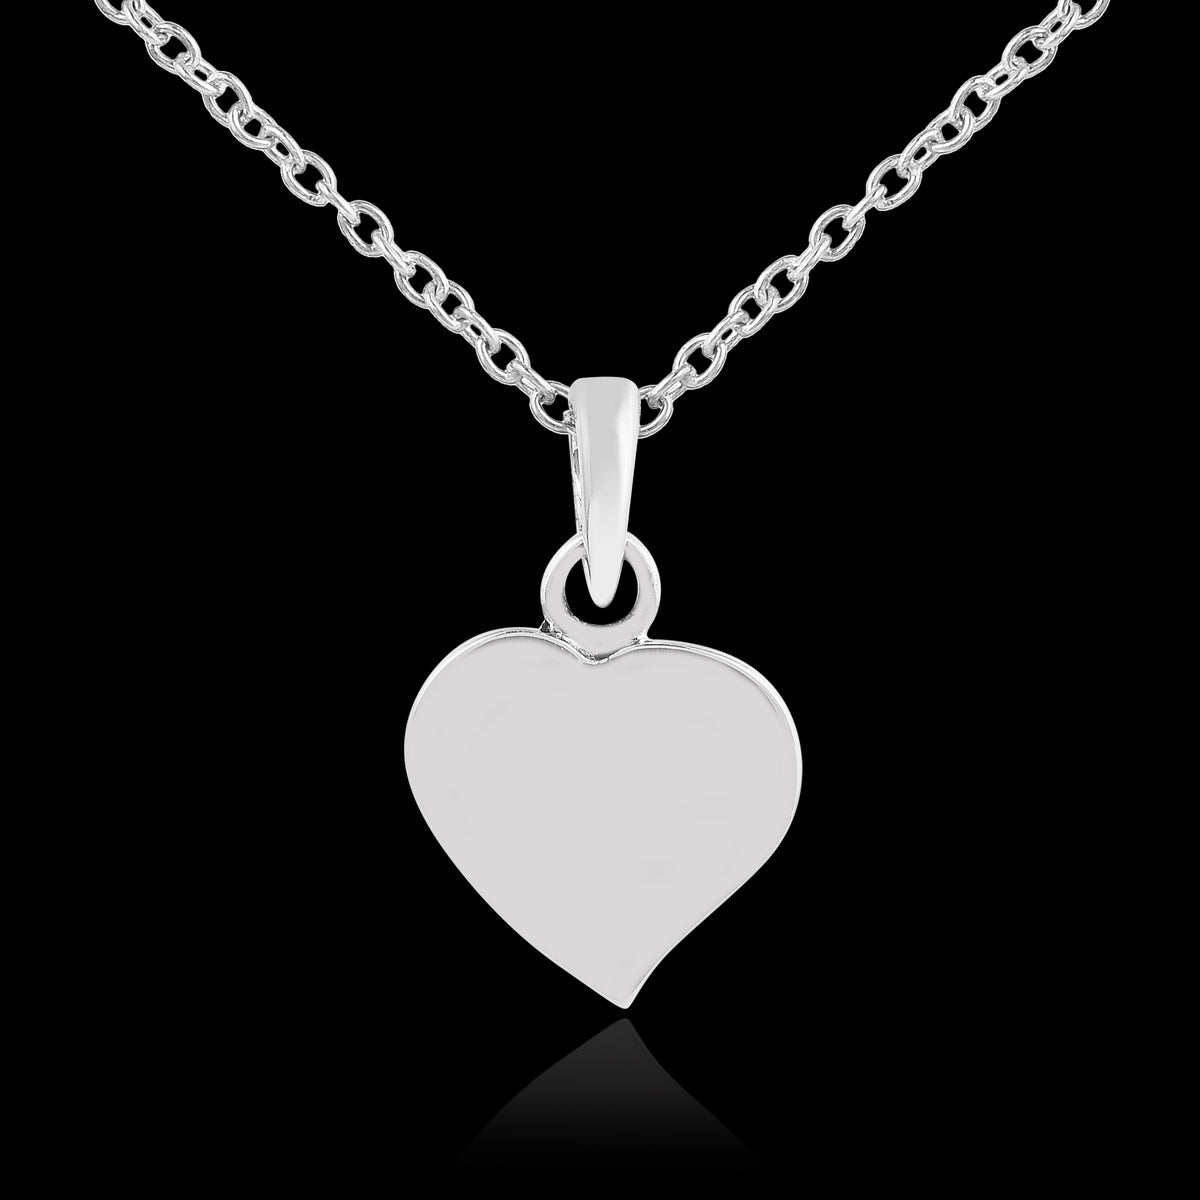 925 Sterling Silver Stylized Heart Pendant Gift for Her